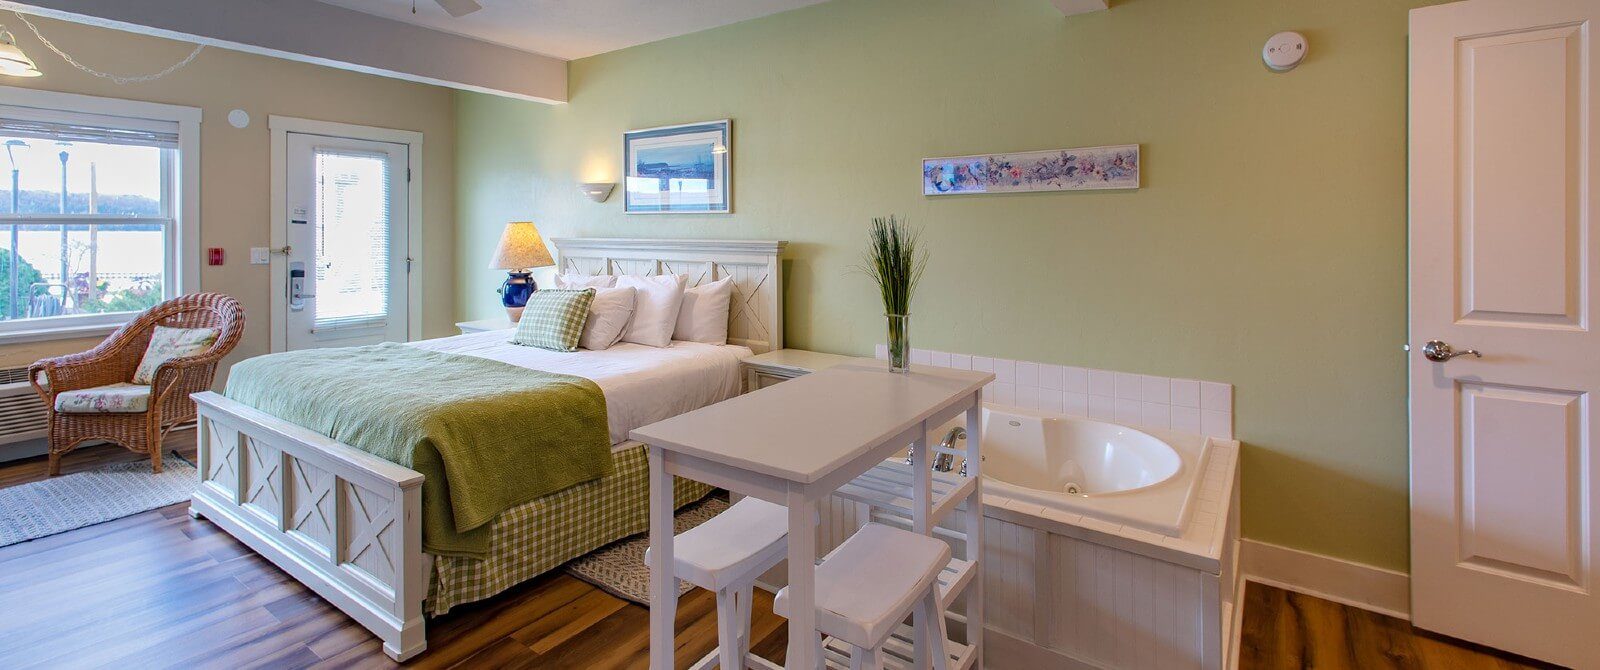 Bright and spacious bedroom with king bed in green and white linens, soaker tub, bistro table with stools and hardwood floors